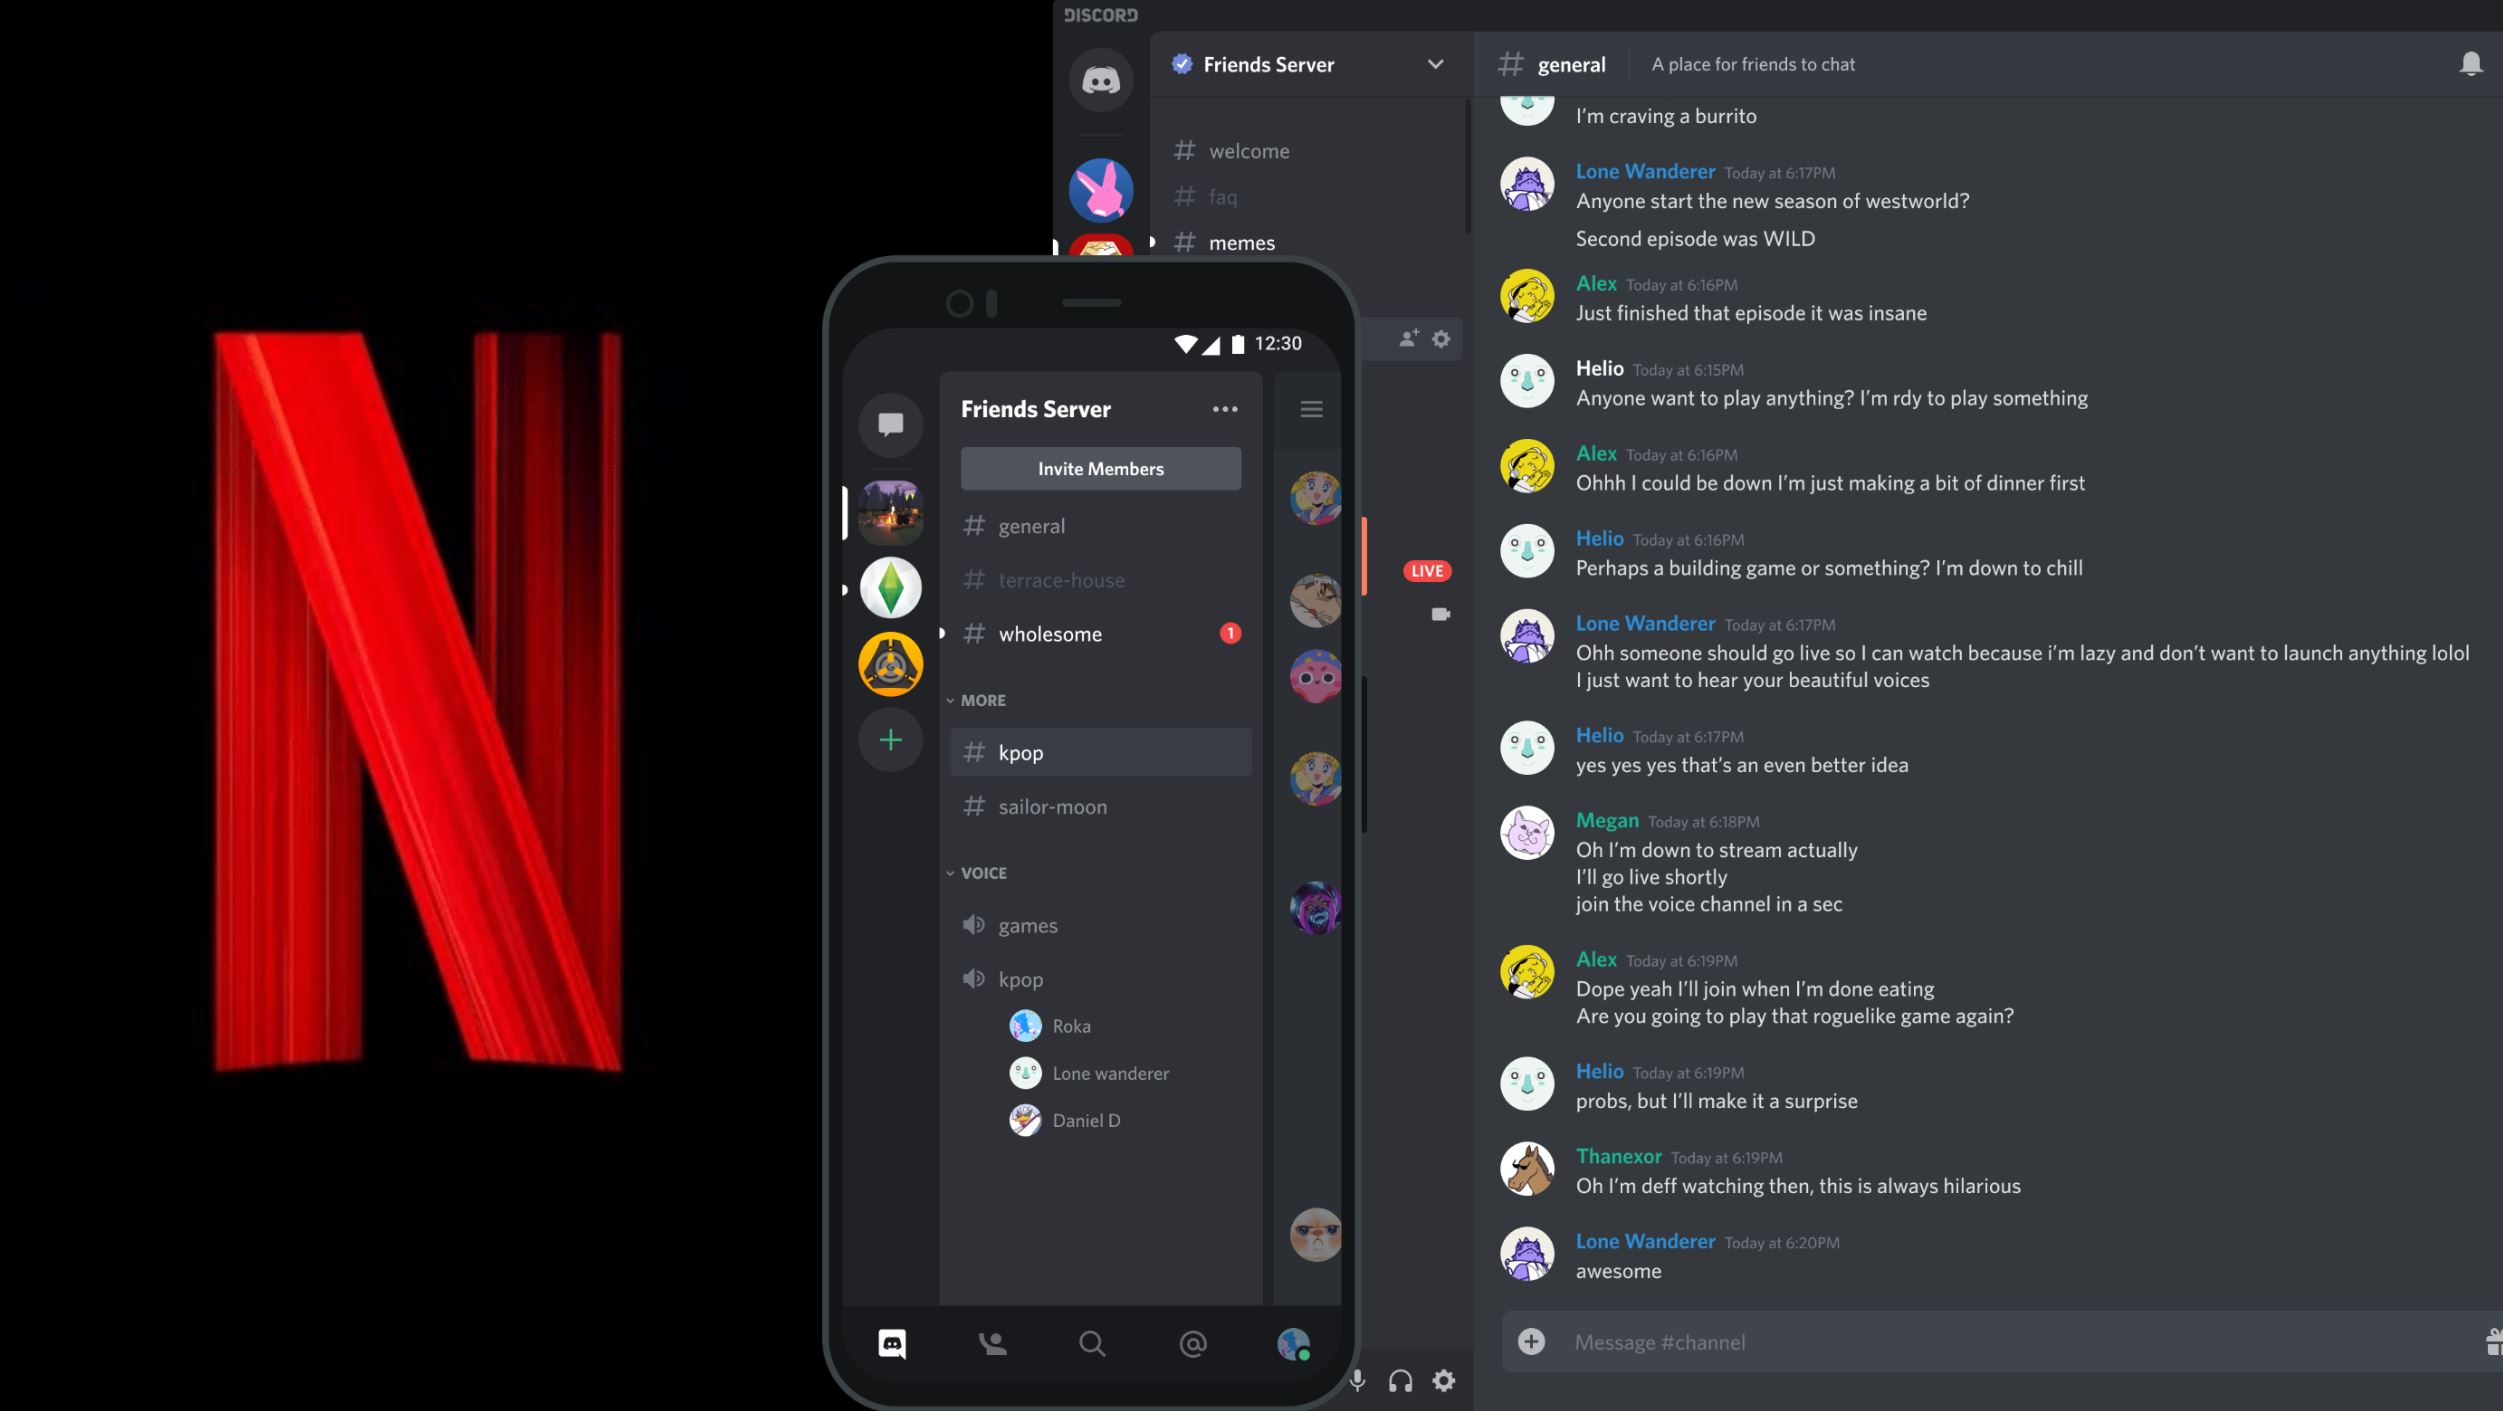 How to Stream Netflix on Discord without Black Screen? – Ivacy VPN